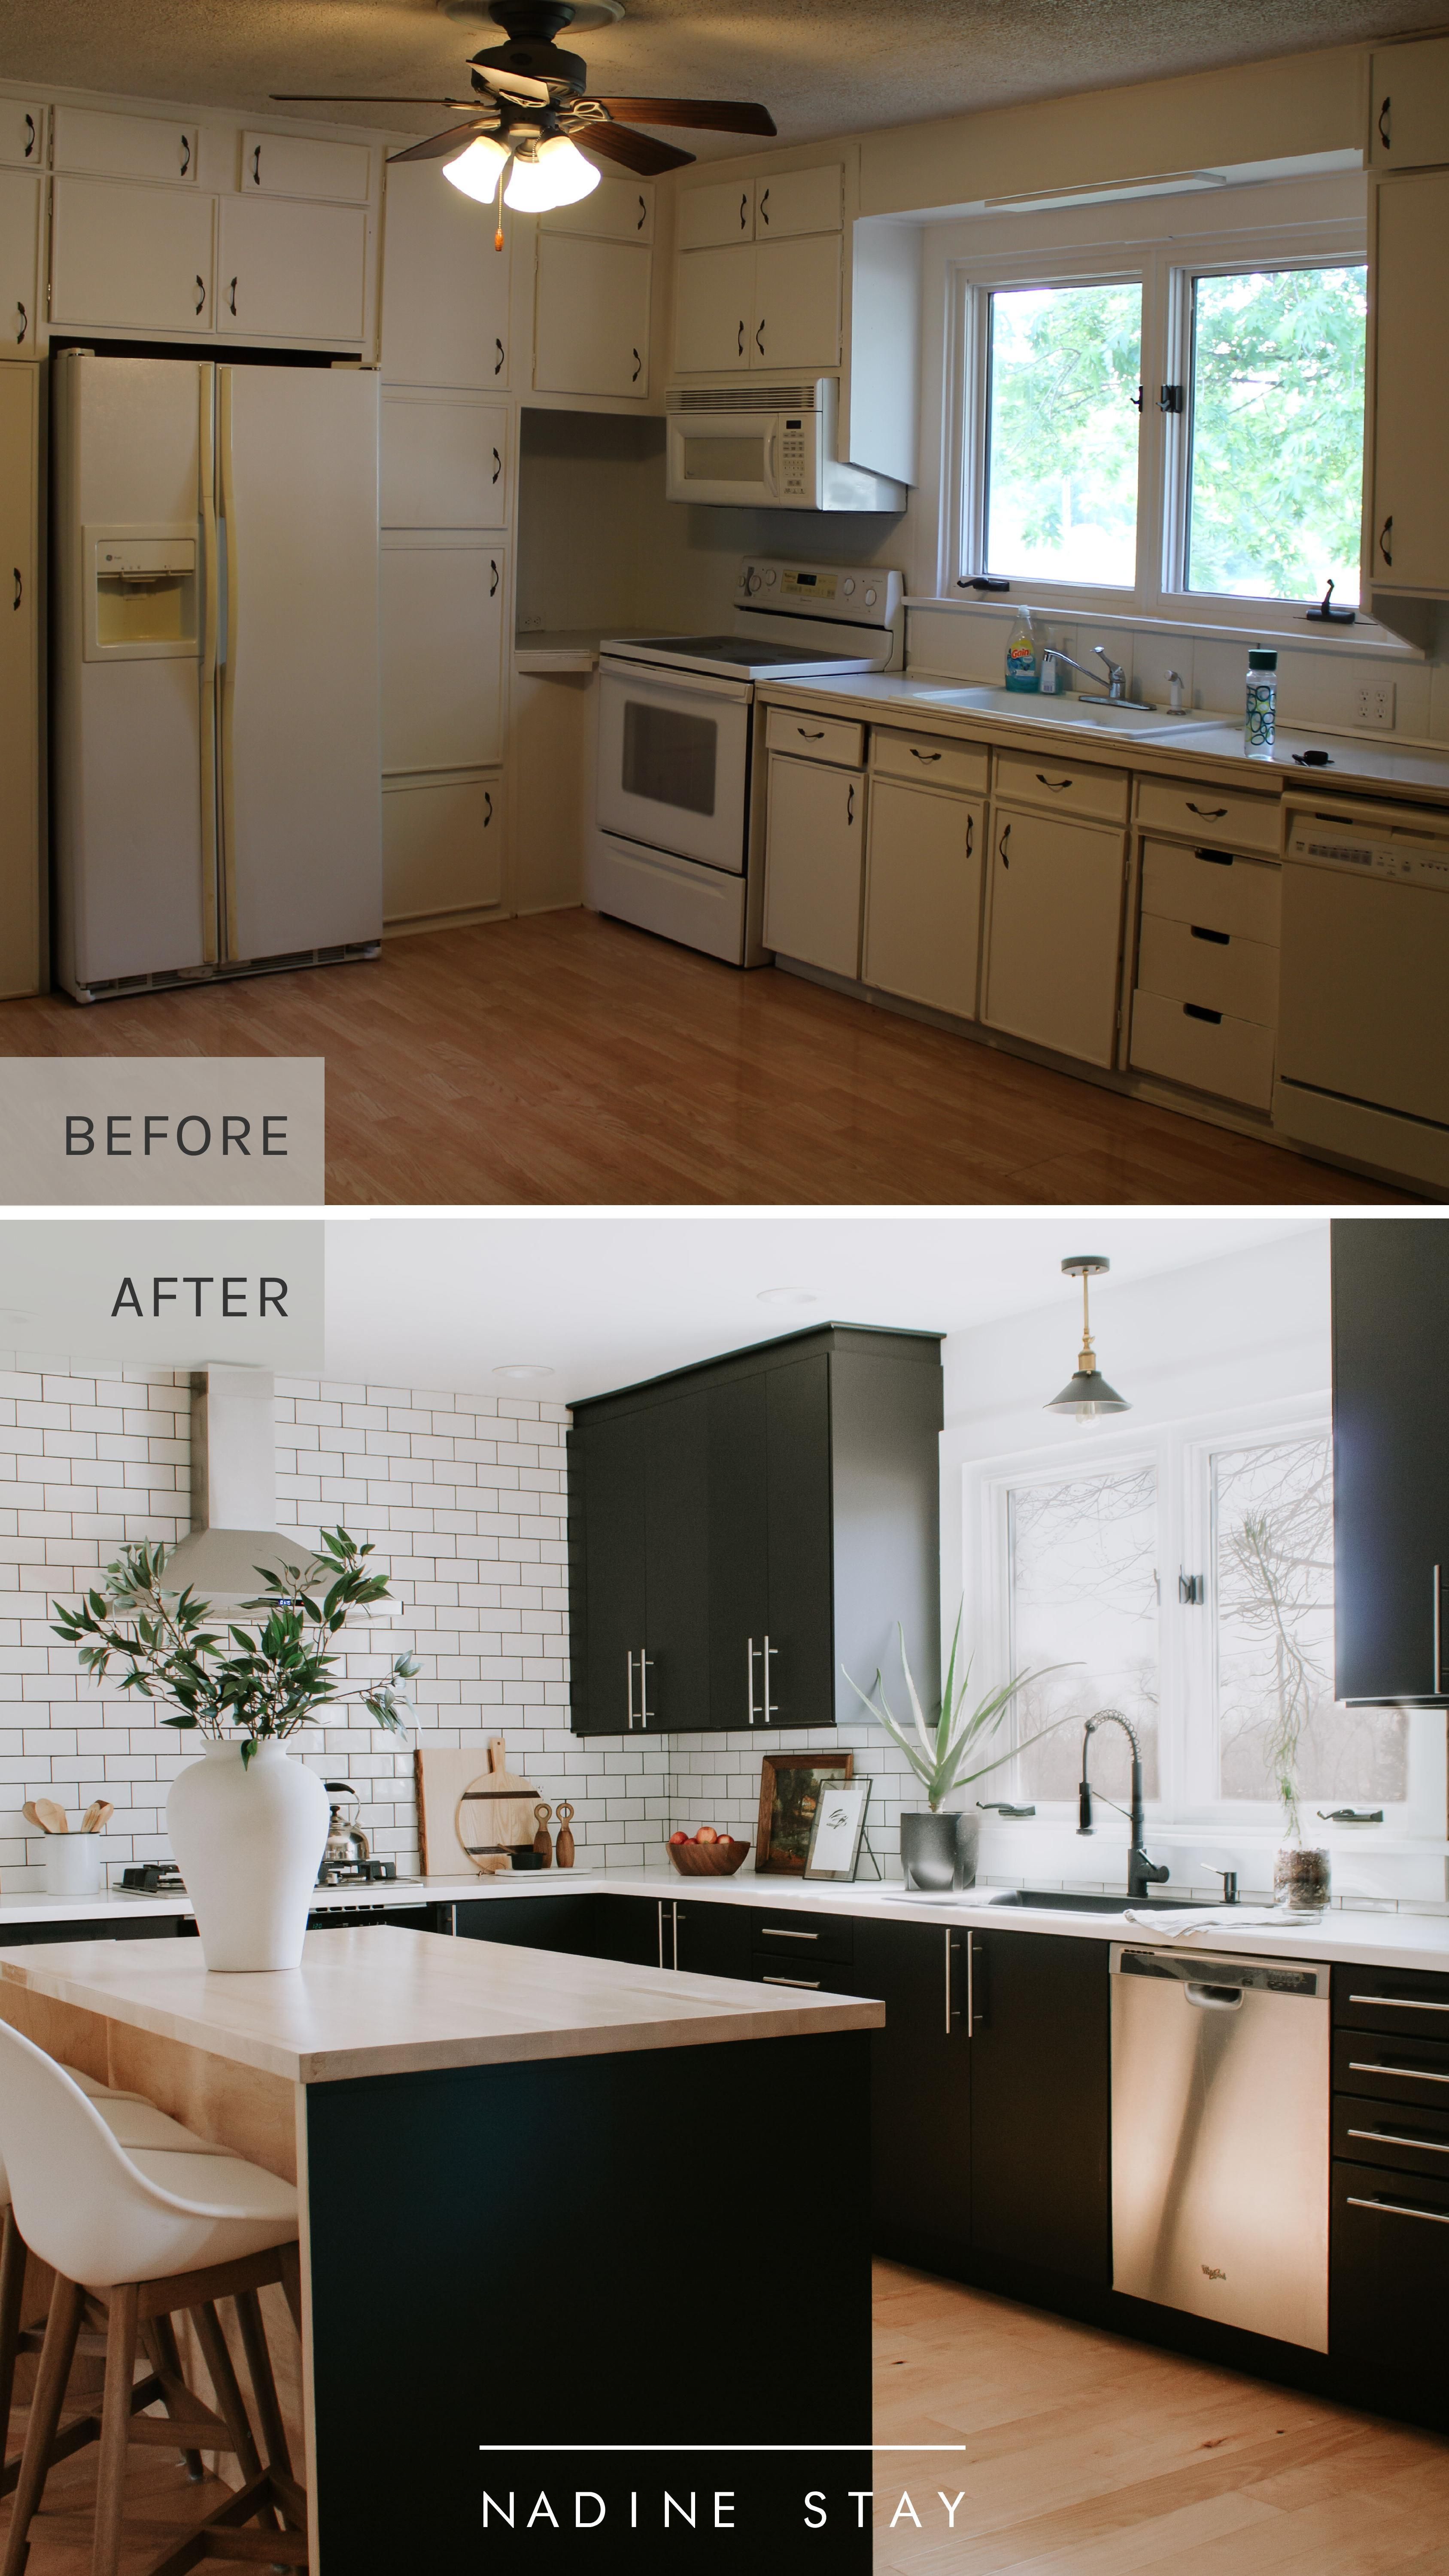 THE KITCHEN REVEAL (BEFORE + AFTER) | Nadine Stay